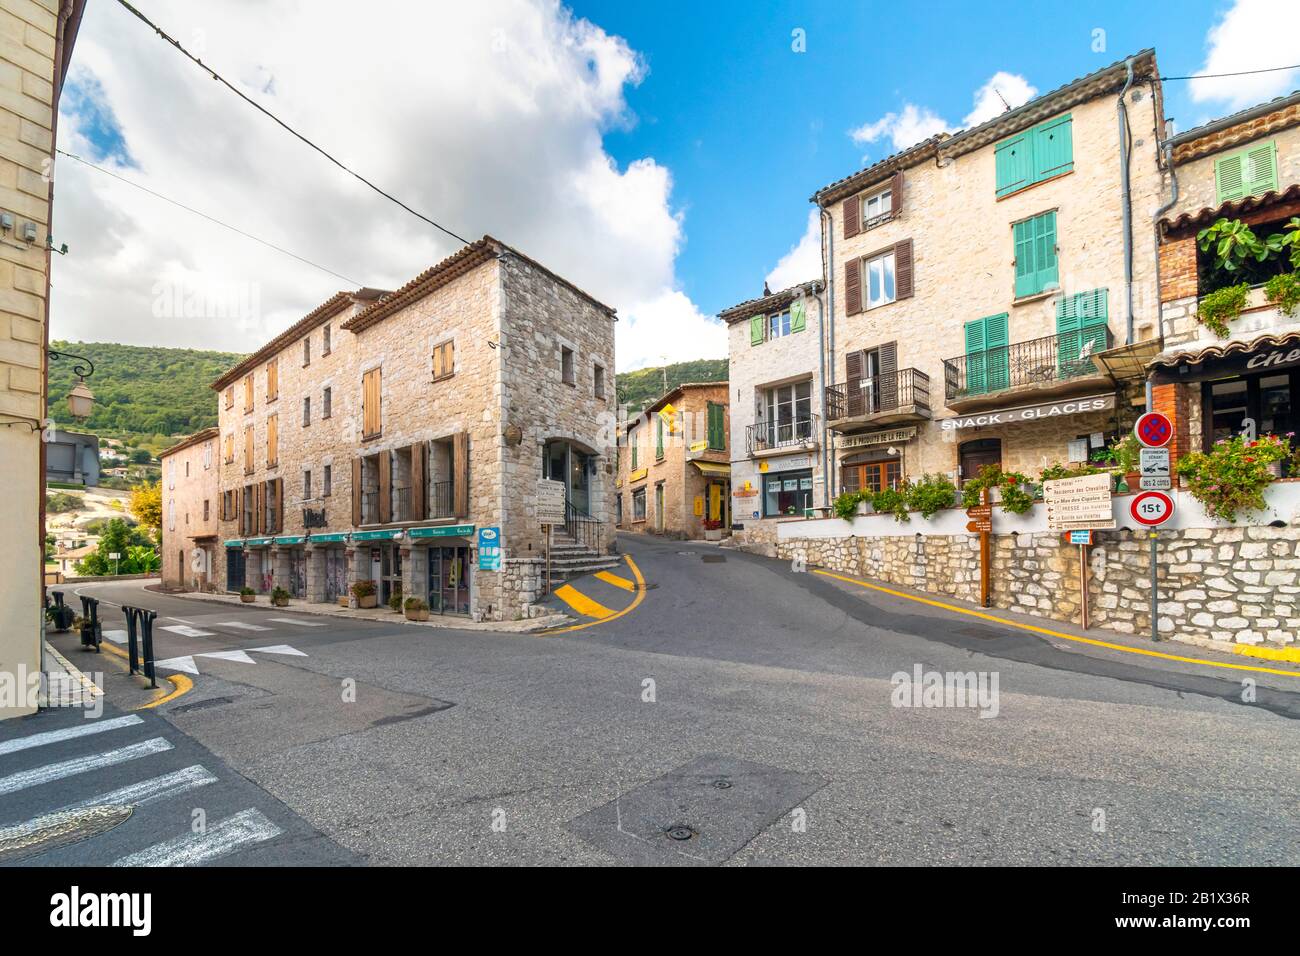 A typical street just outside the medieval walled village of Tourrettes Sur Loup, France, in the Alpes-Maritimes commune of Southern France. Stock Photo